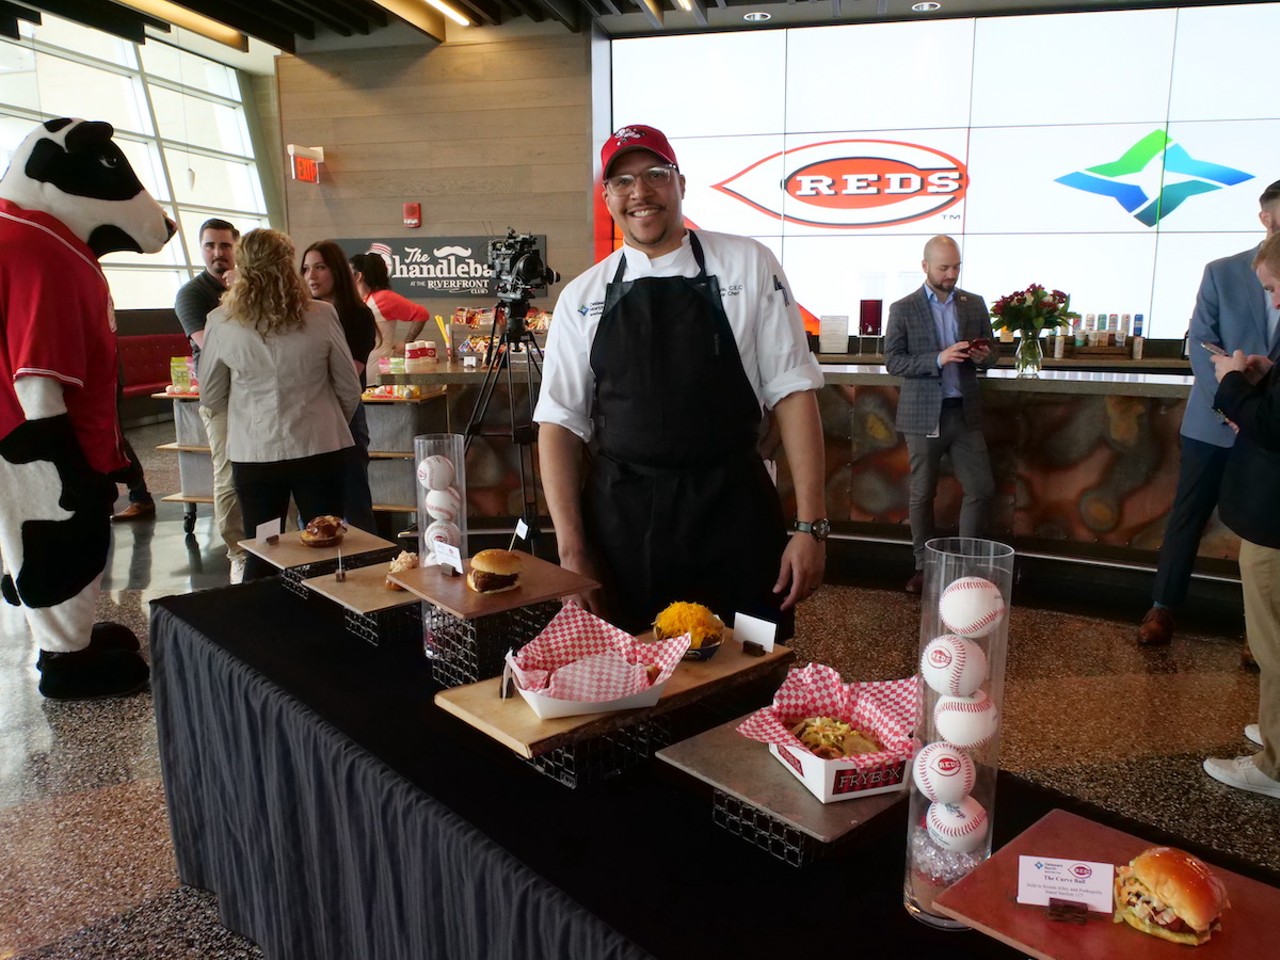 Delaware North executive chef Gary Davis introduces new food options at Great American Ball Park on March 23, 2023, ahead of the Cincinnati Reds' 2023 season.